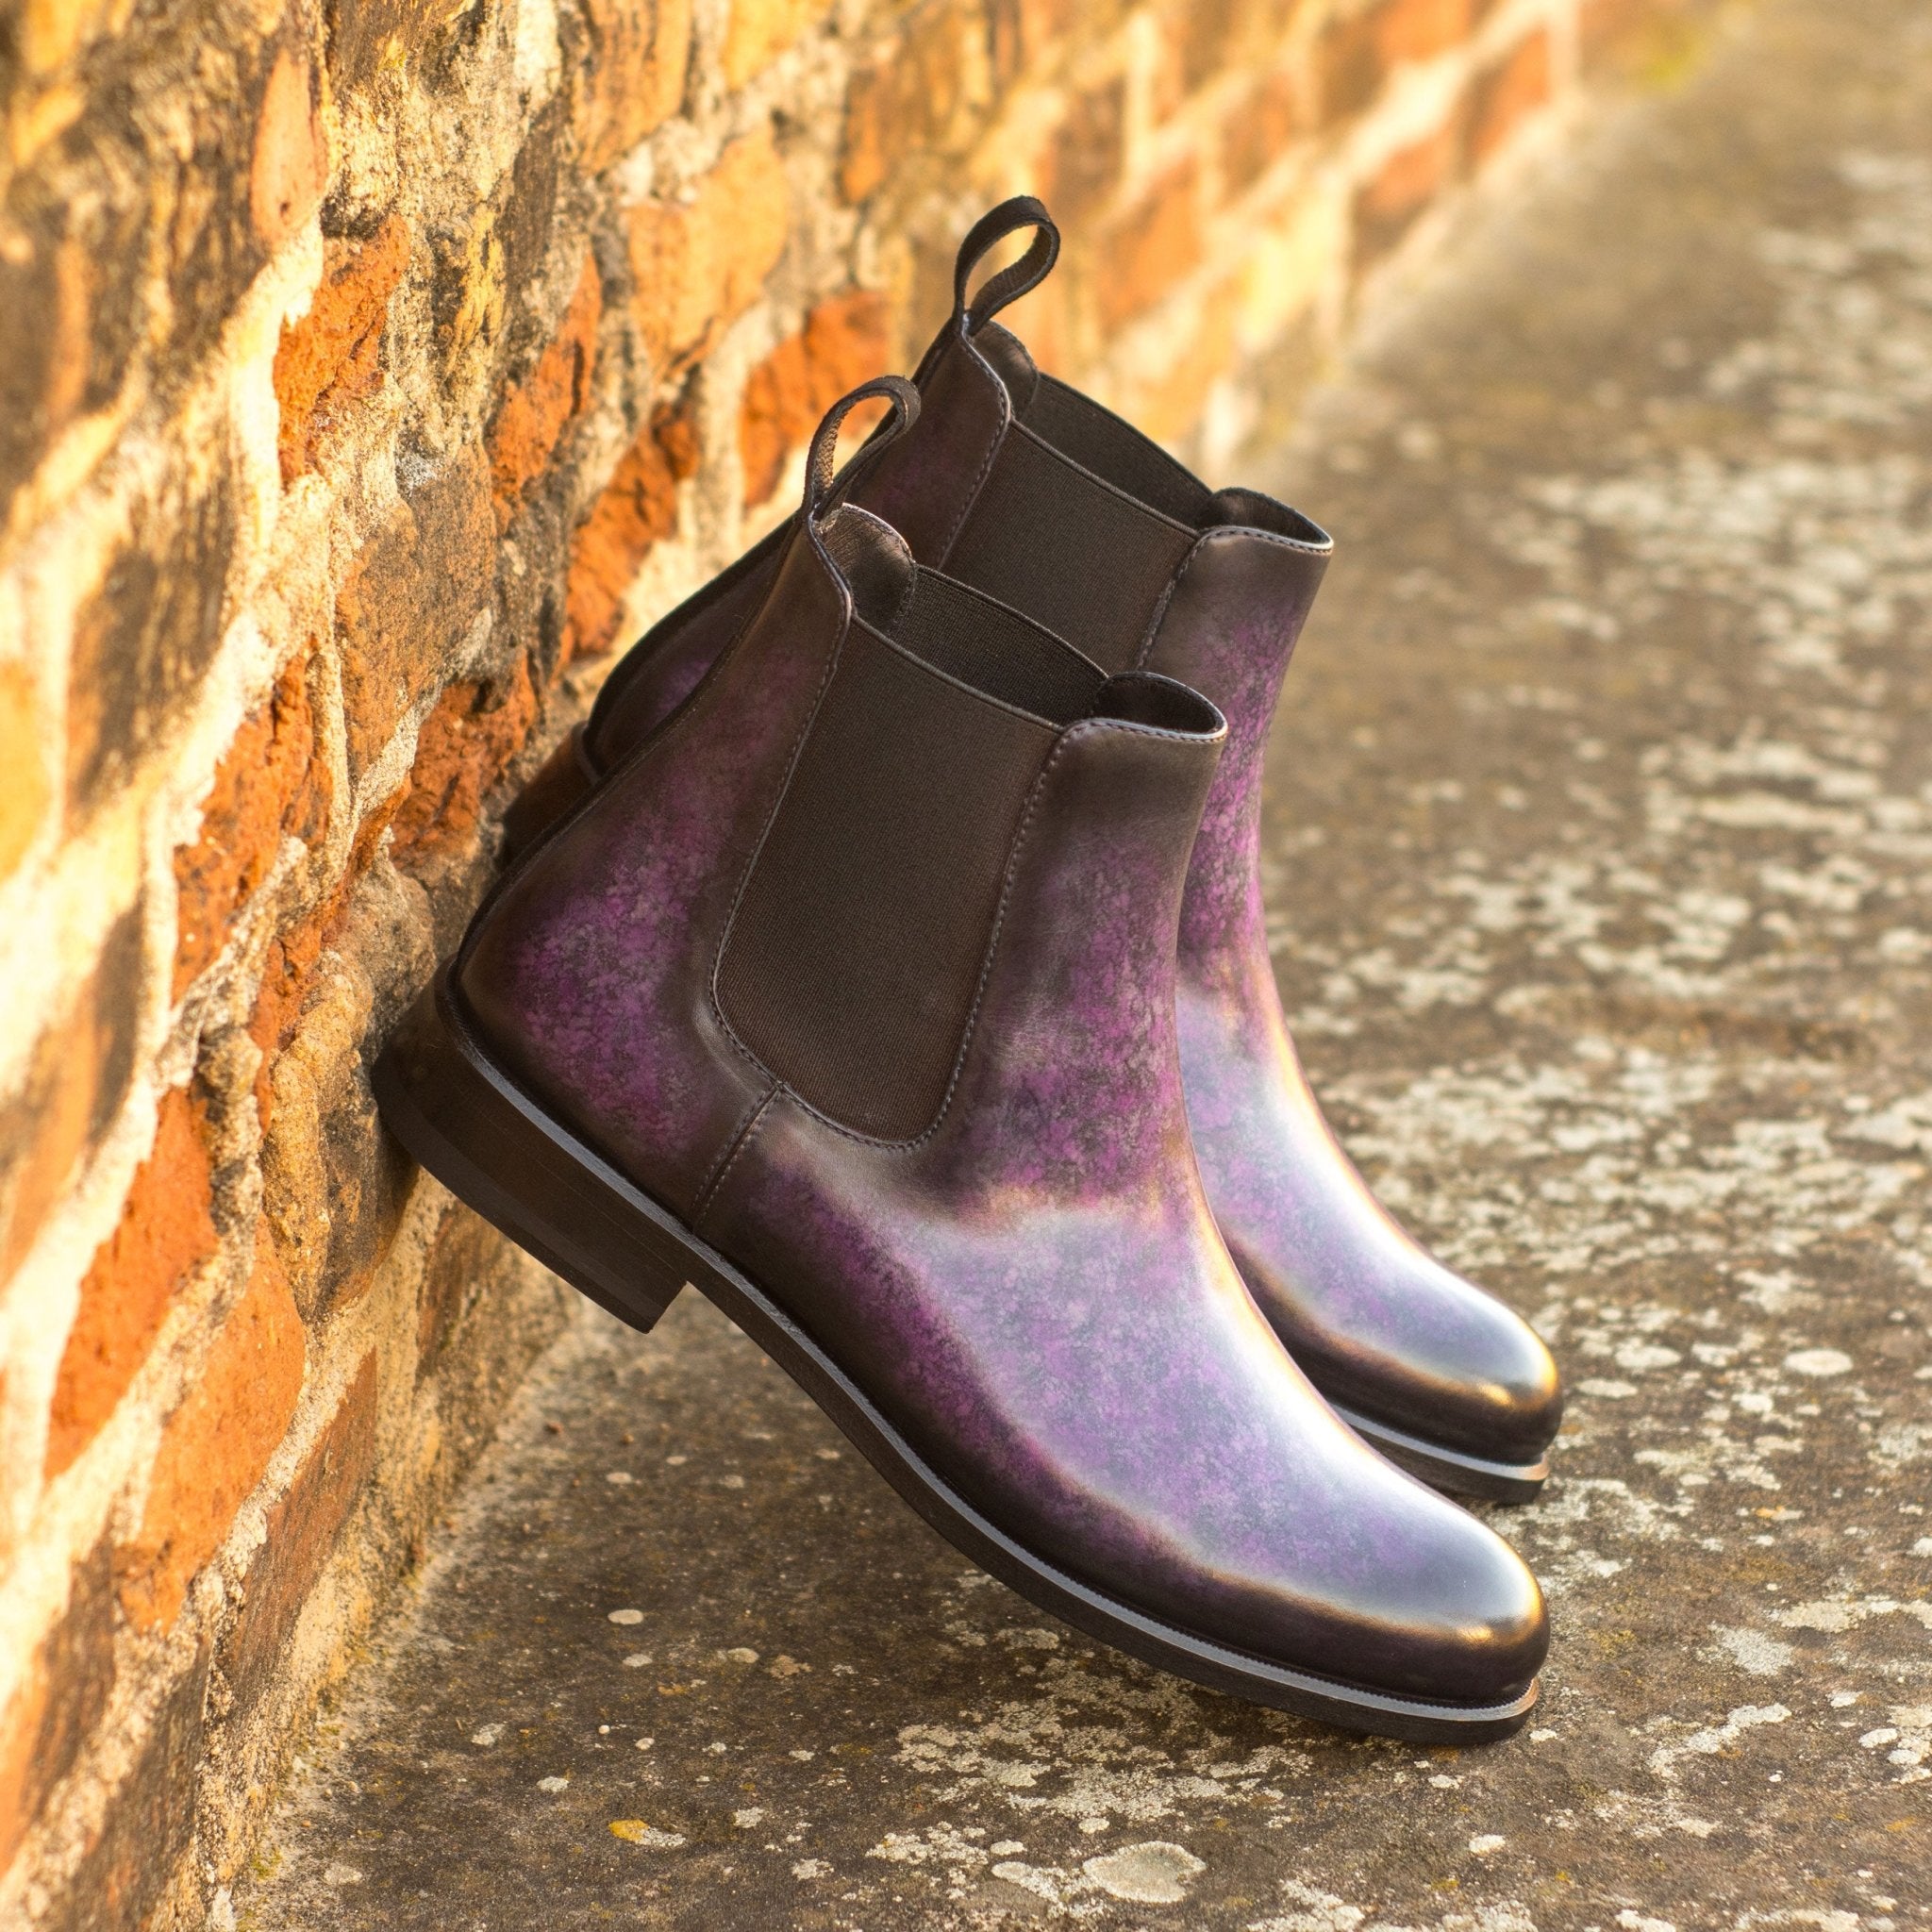 Women's Purple Patina Chelsea Boots Hand-painted - Maison Kingsley Couture Spain